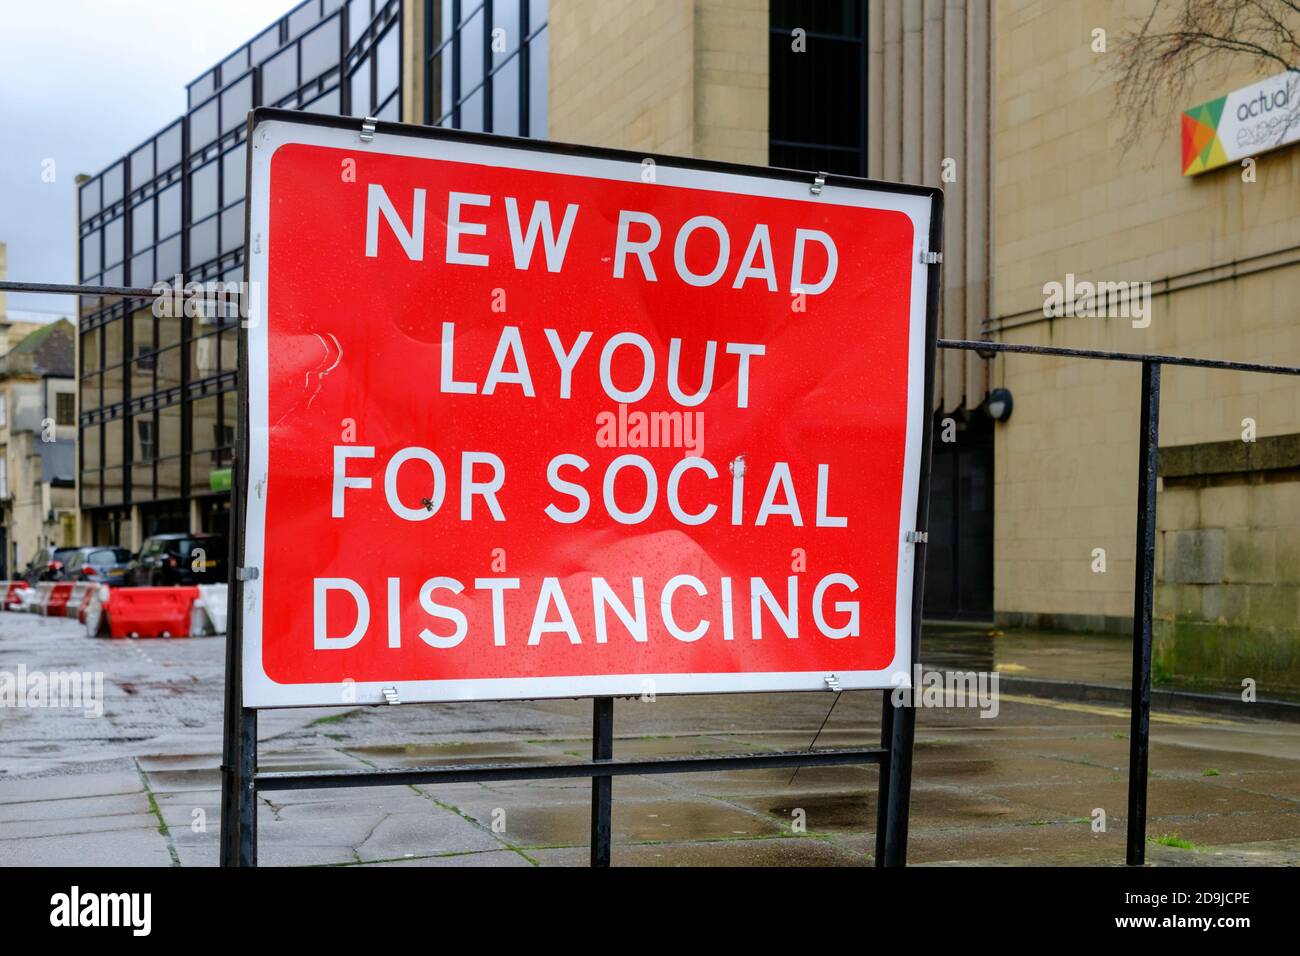 A red sign for a new social distancing road layout in Bath city centre. Stock Photo